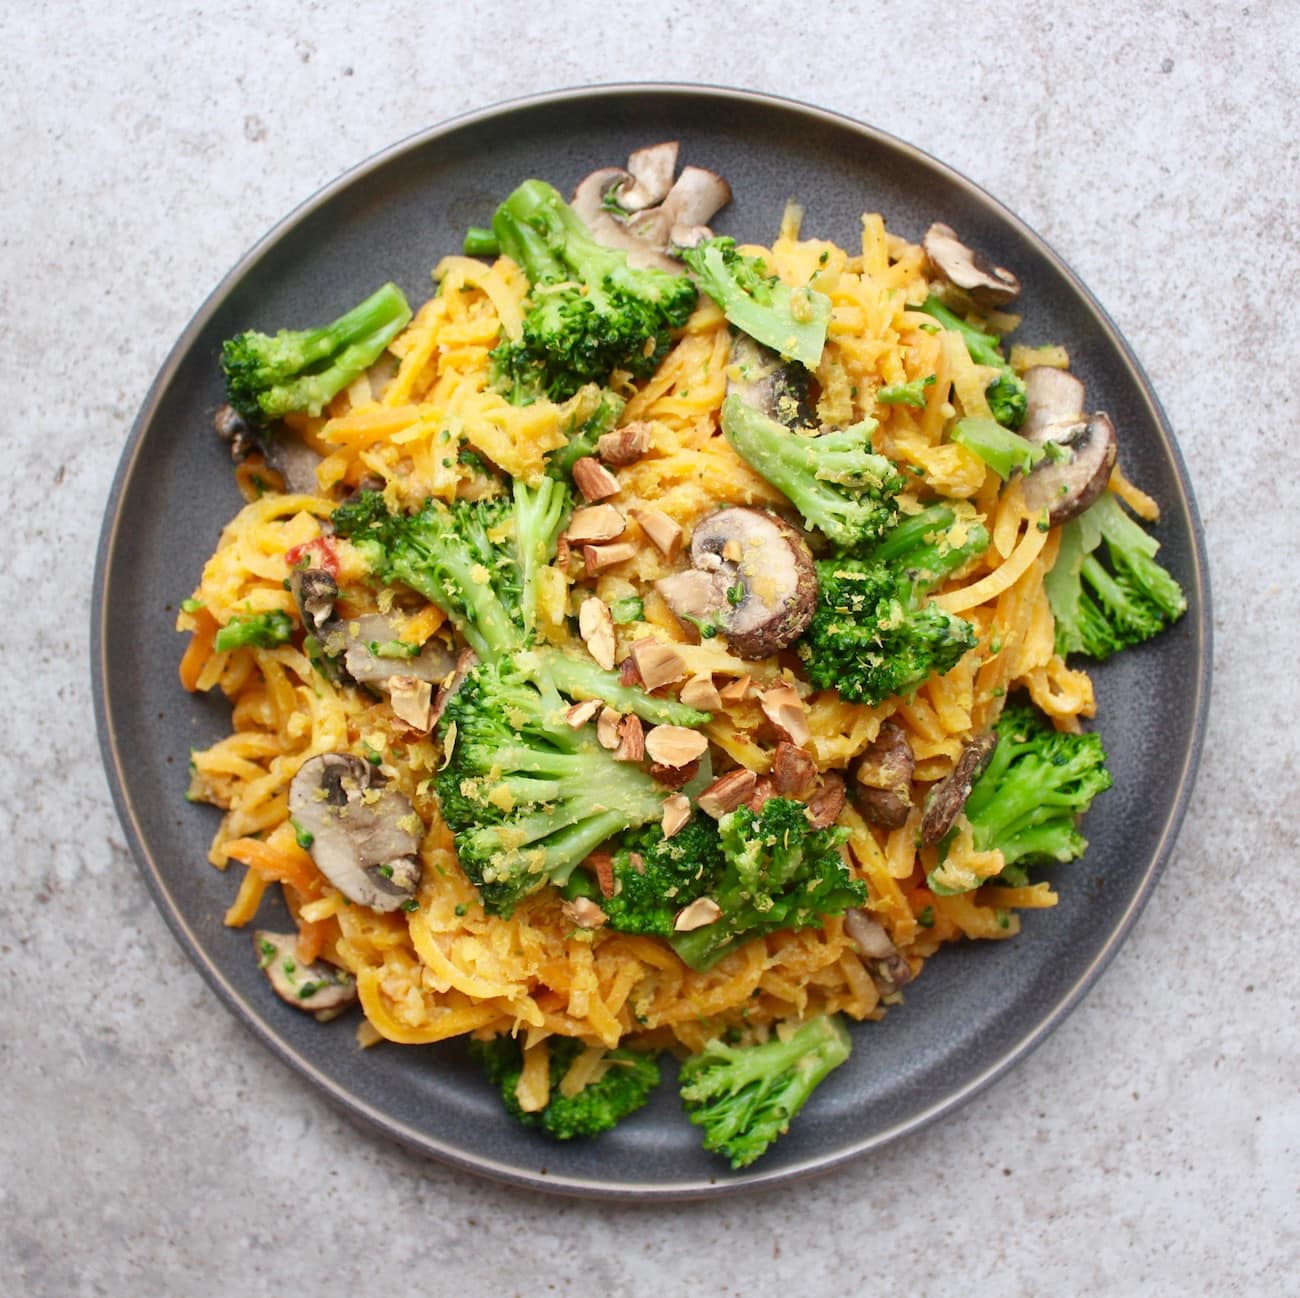 Microwaveable cheese butternut squash noodles with broccoli and mushrooms